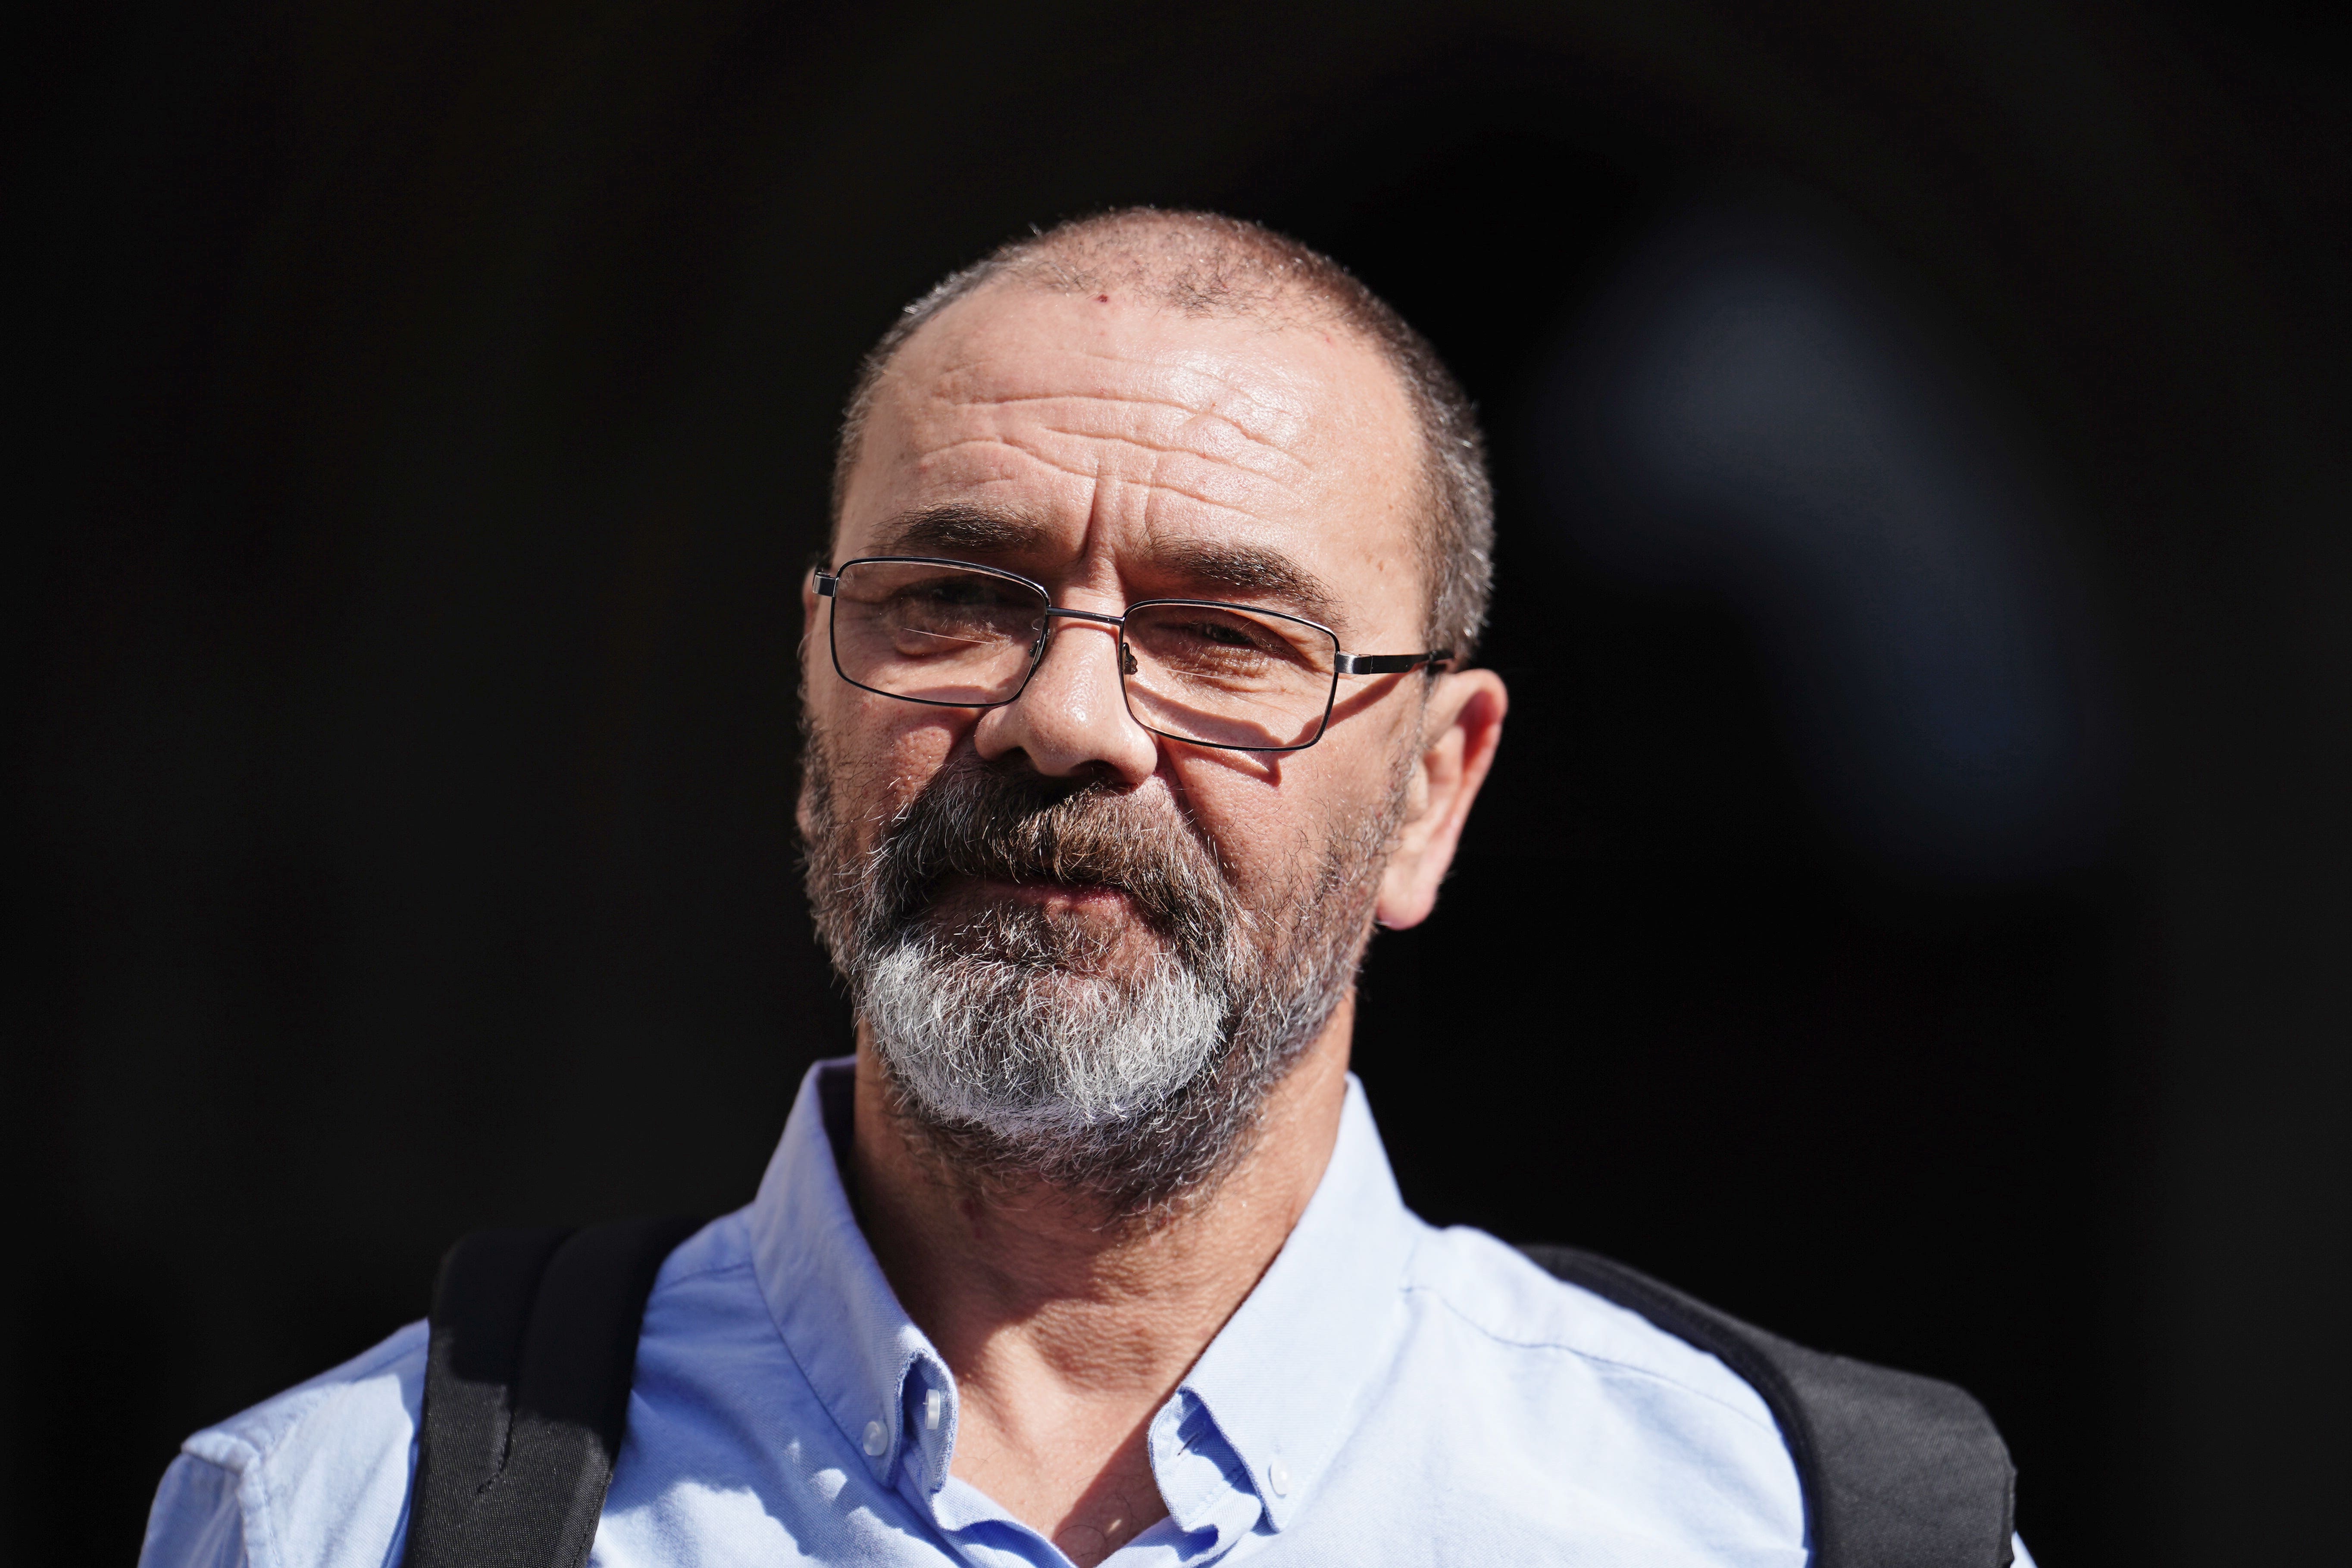 Andrew Malkinson had his conviction quashed at the Royal Courts of Justice in London (Jordan Pettitt/PA)